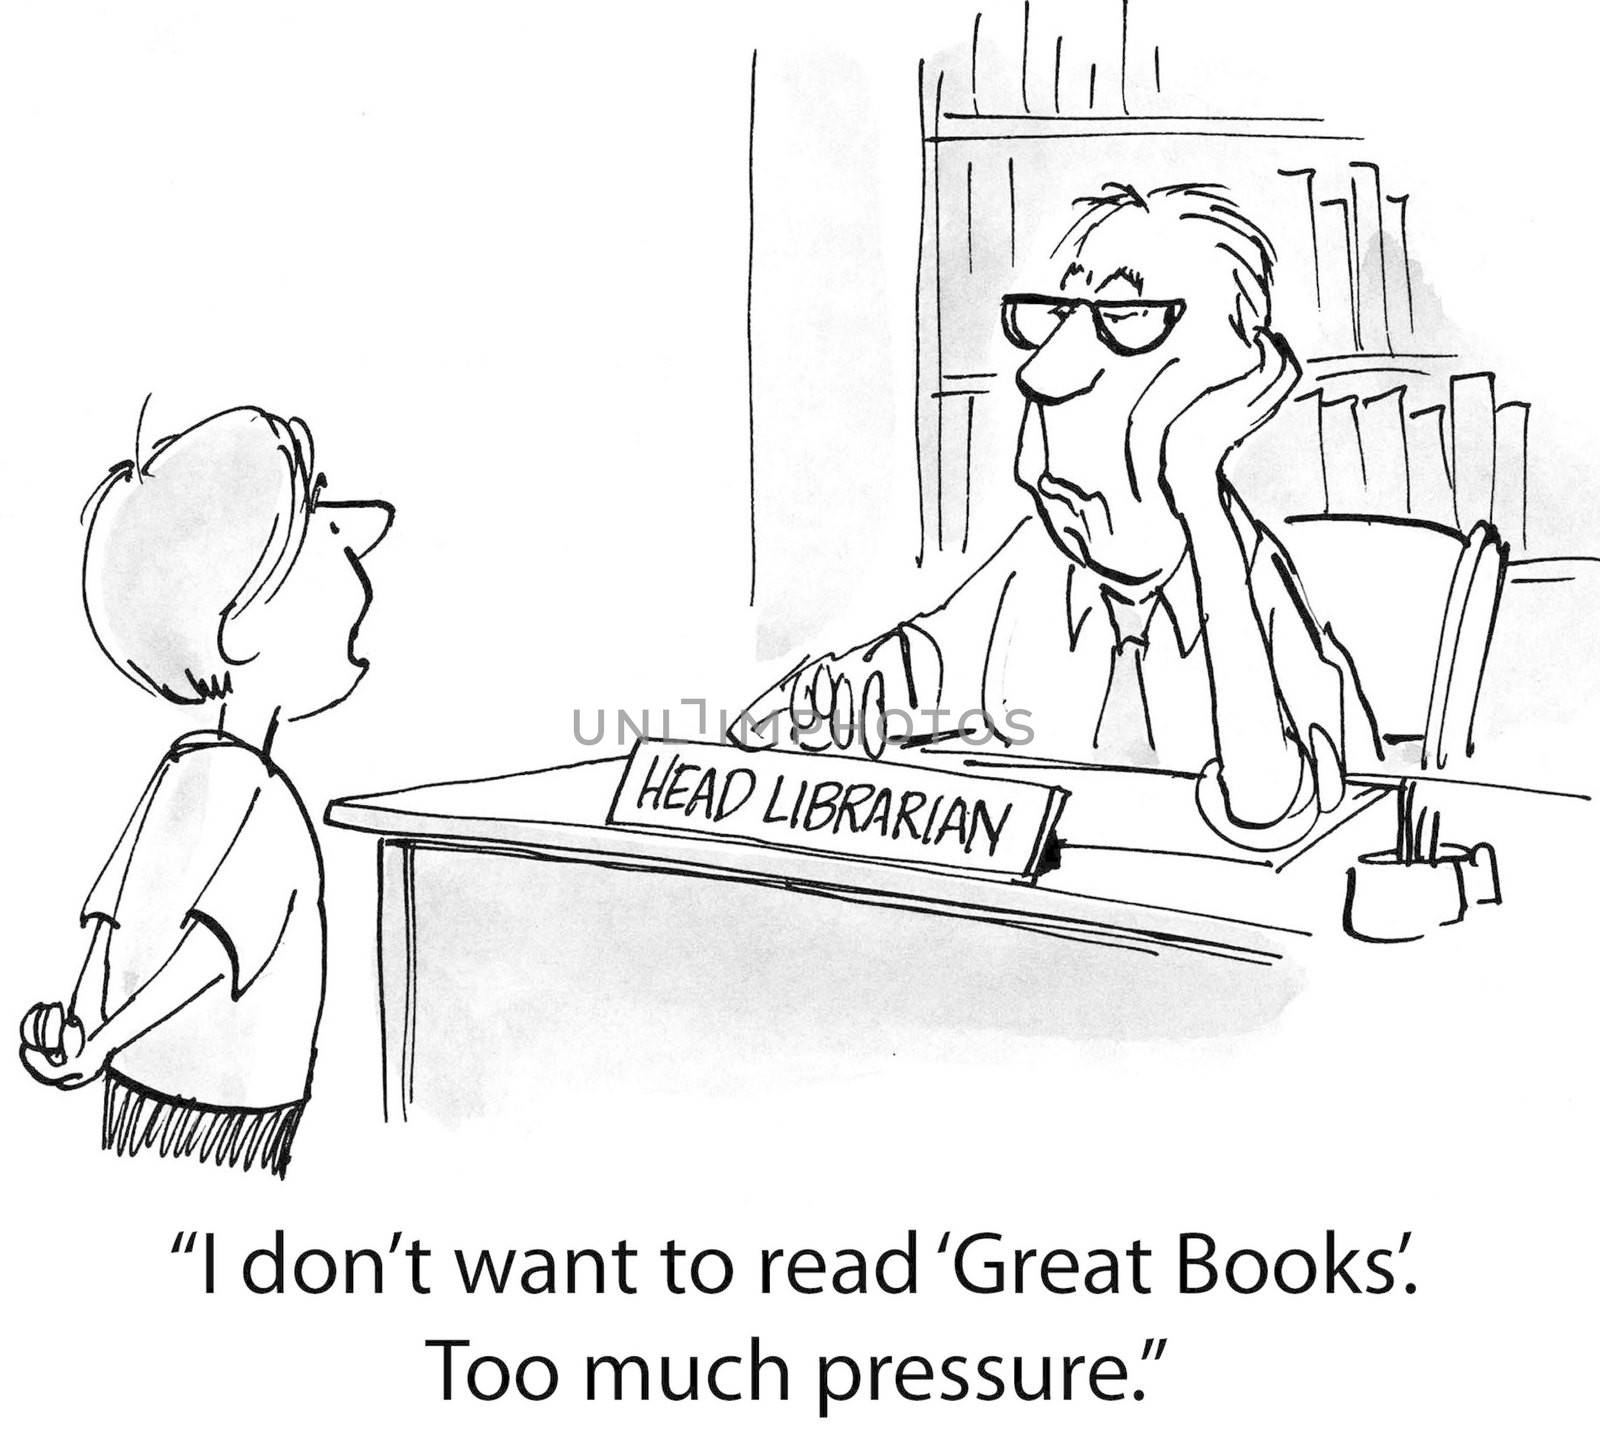 "I don't want to read 'Great Books'. Too much pressure."